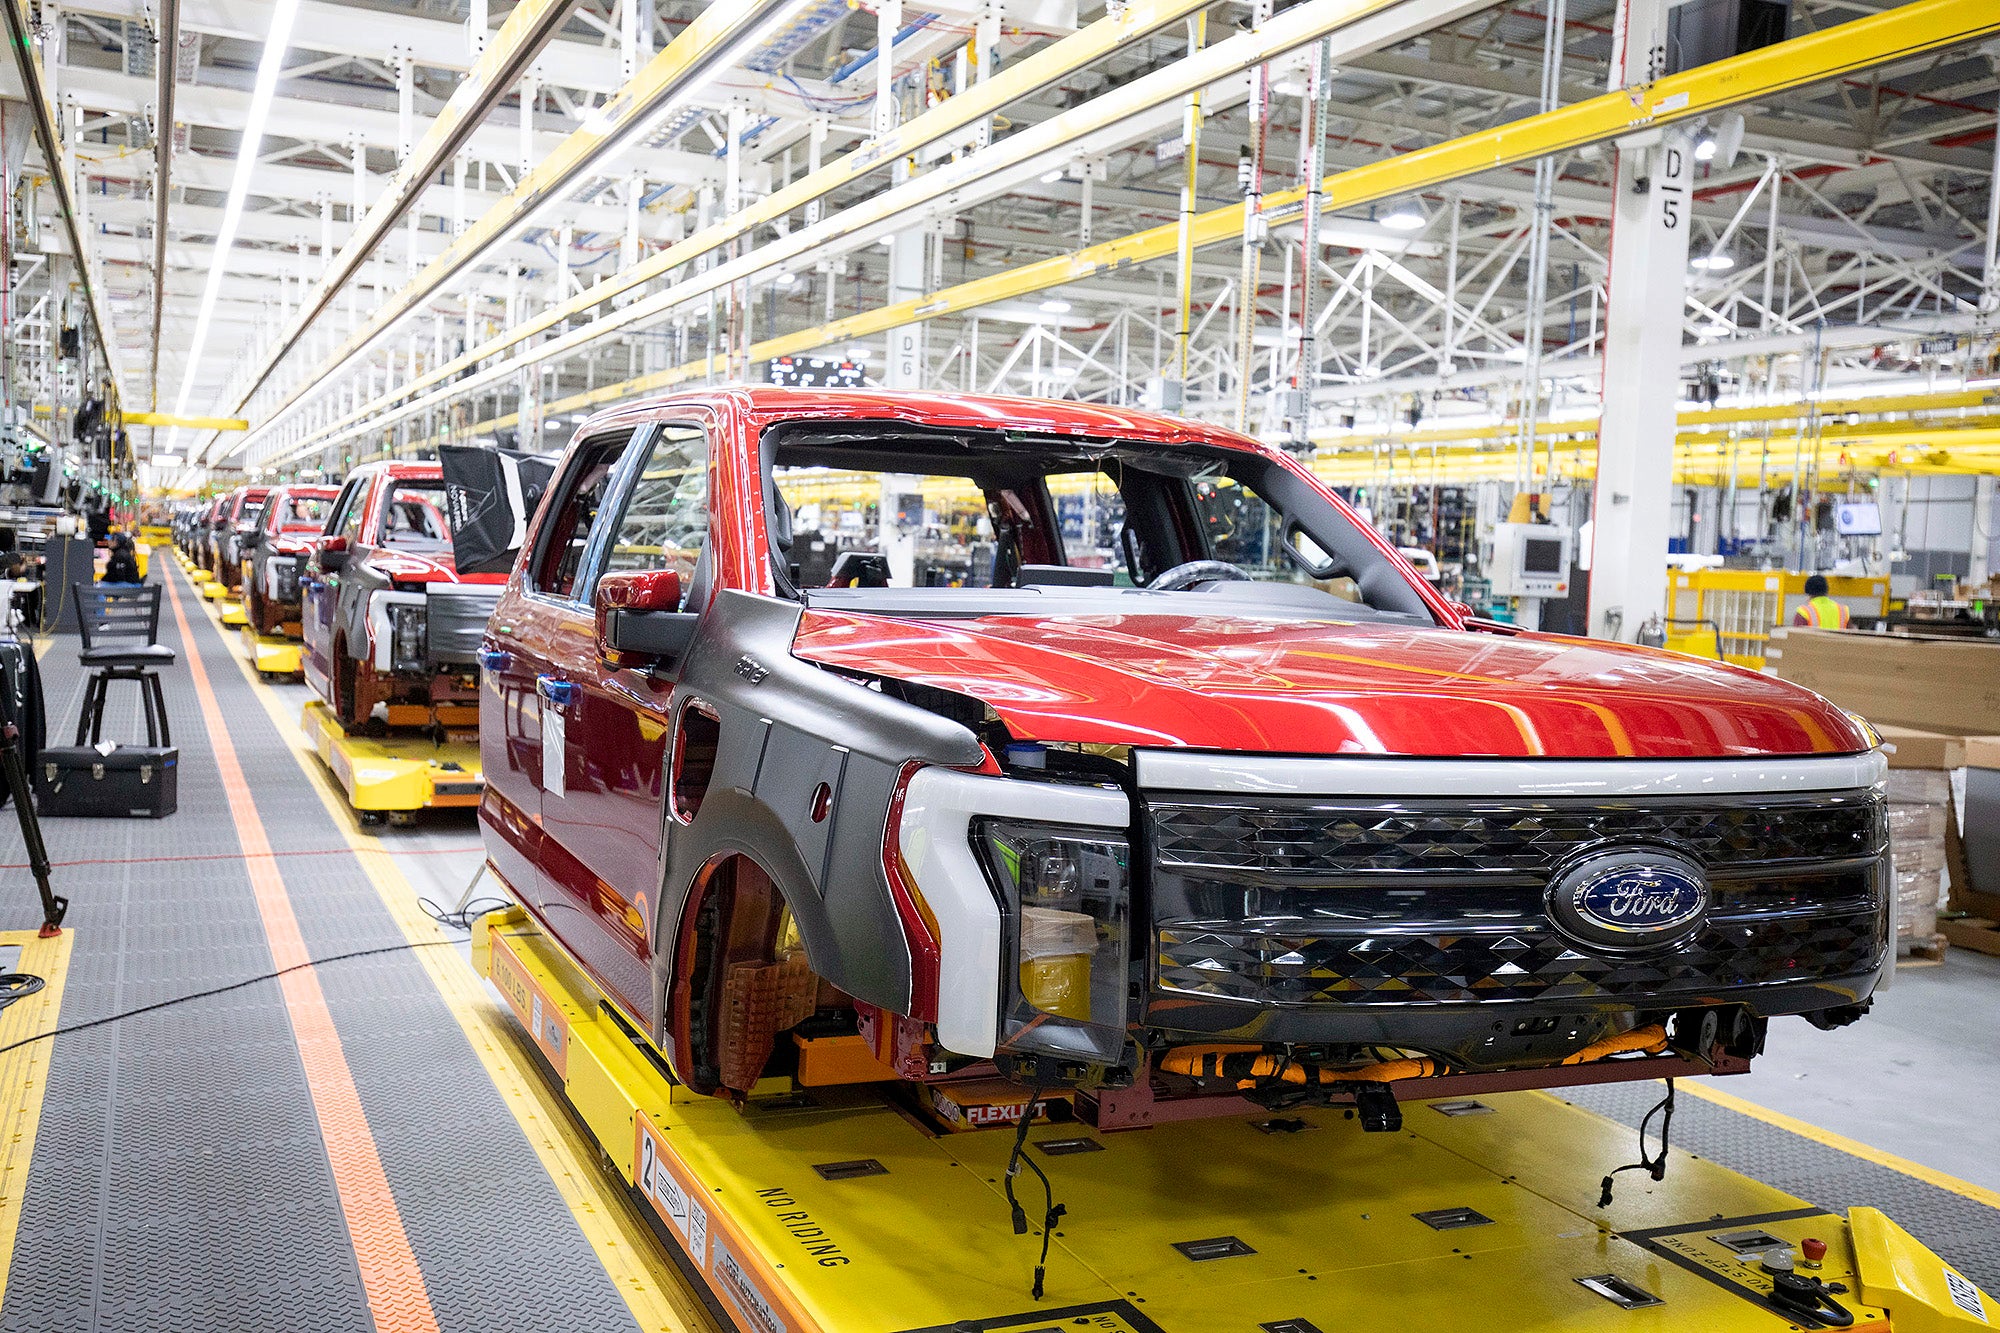 Ford F-150 Lightning pickup trucks sit on the production line at the Ford Rouge Electric Vehicle Center in Dearborn, Michigan.